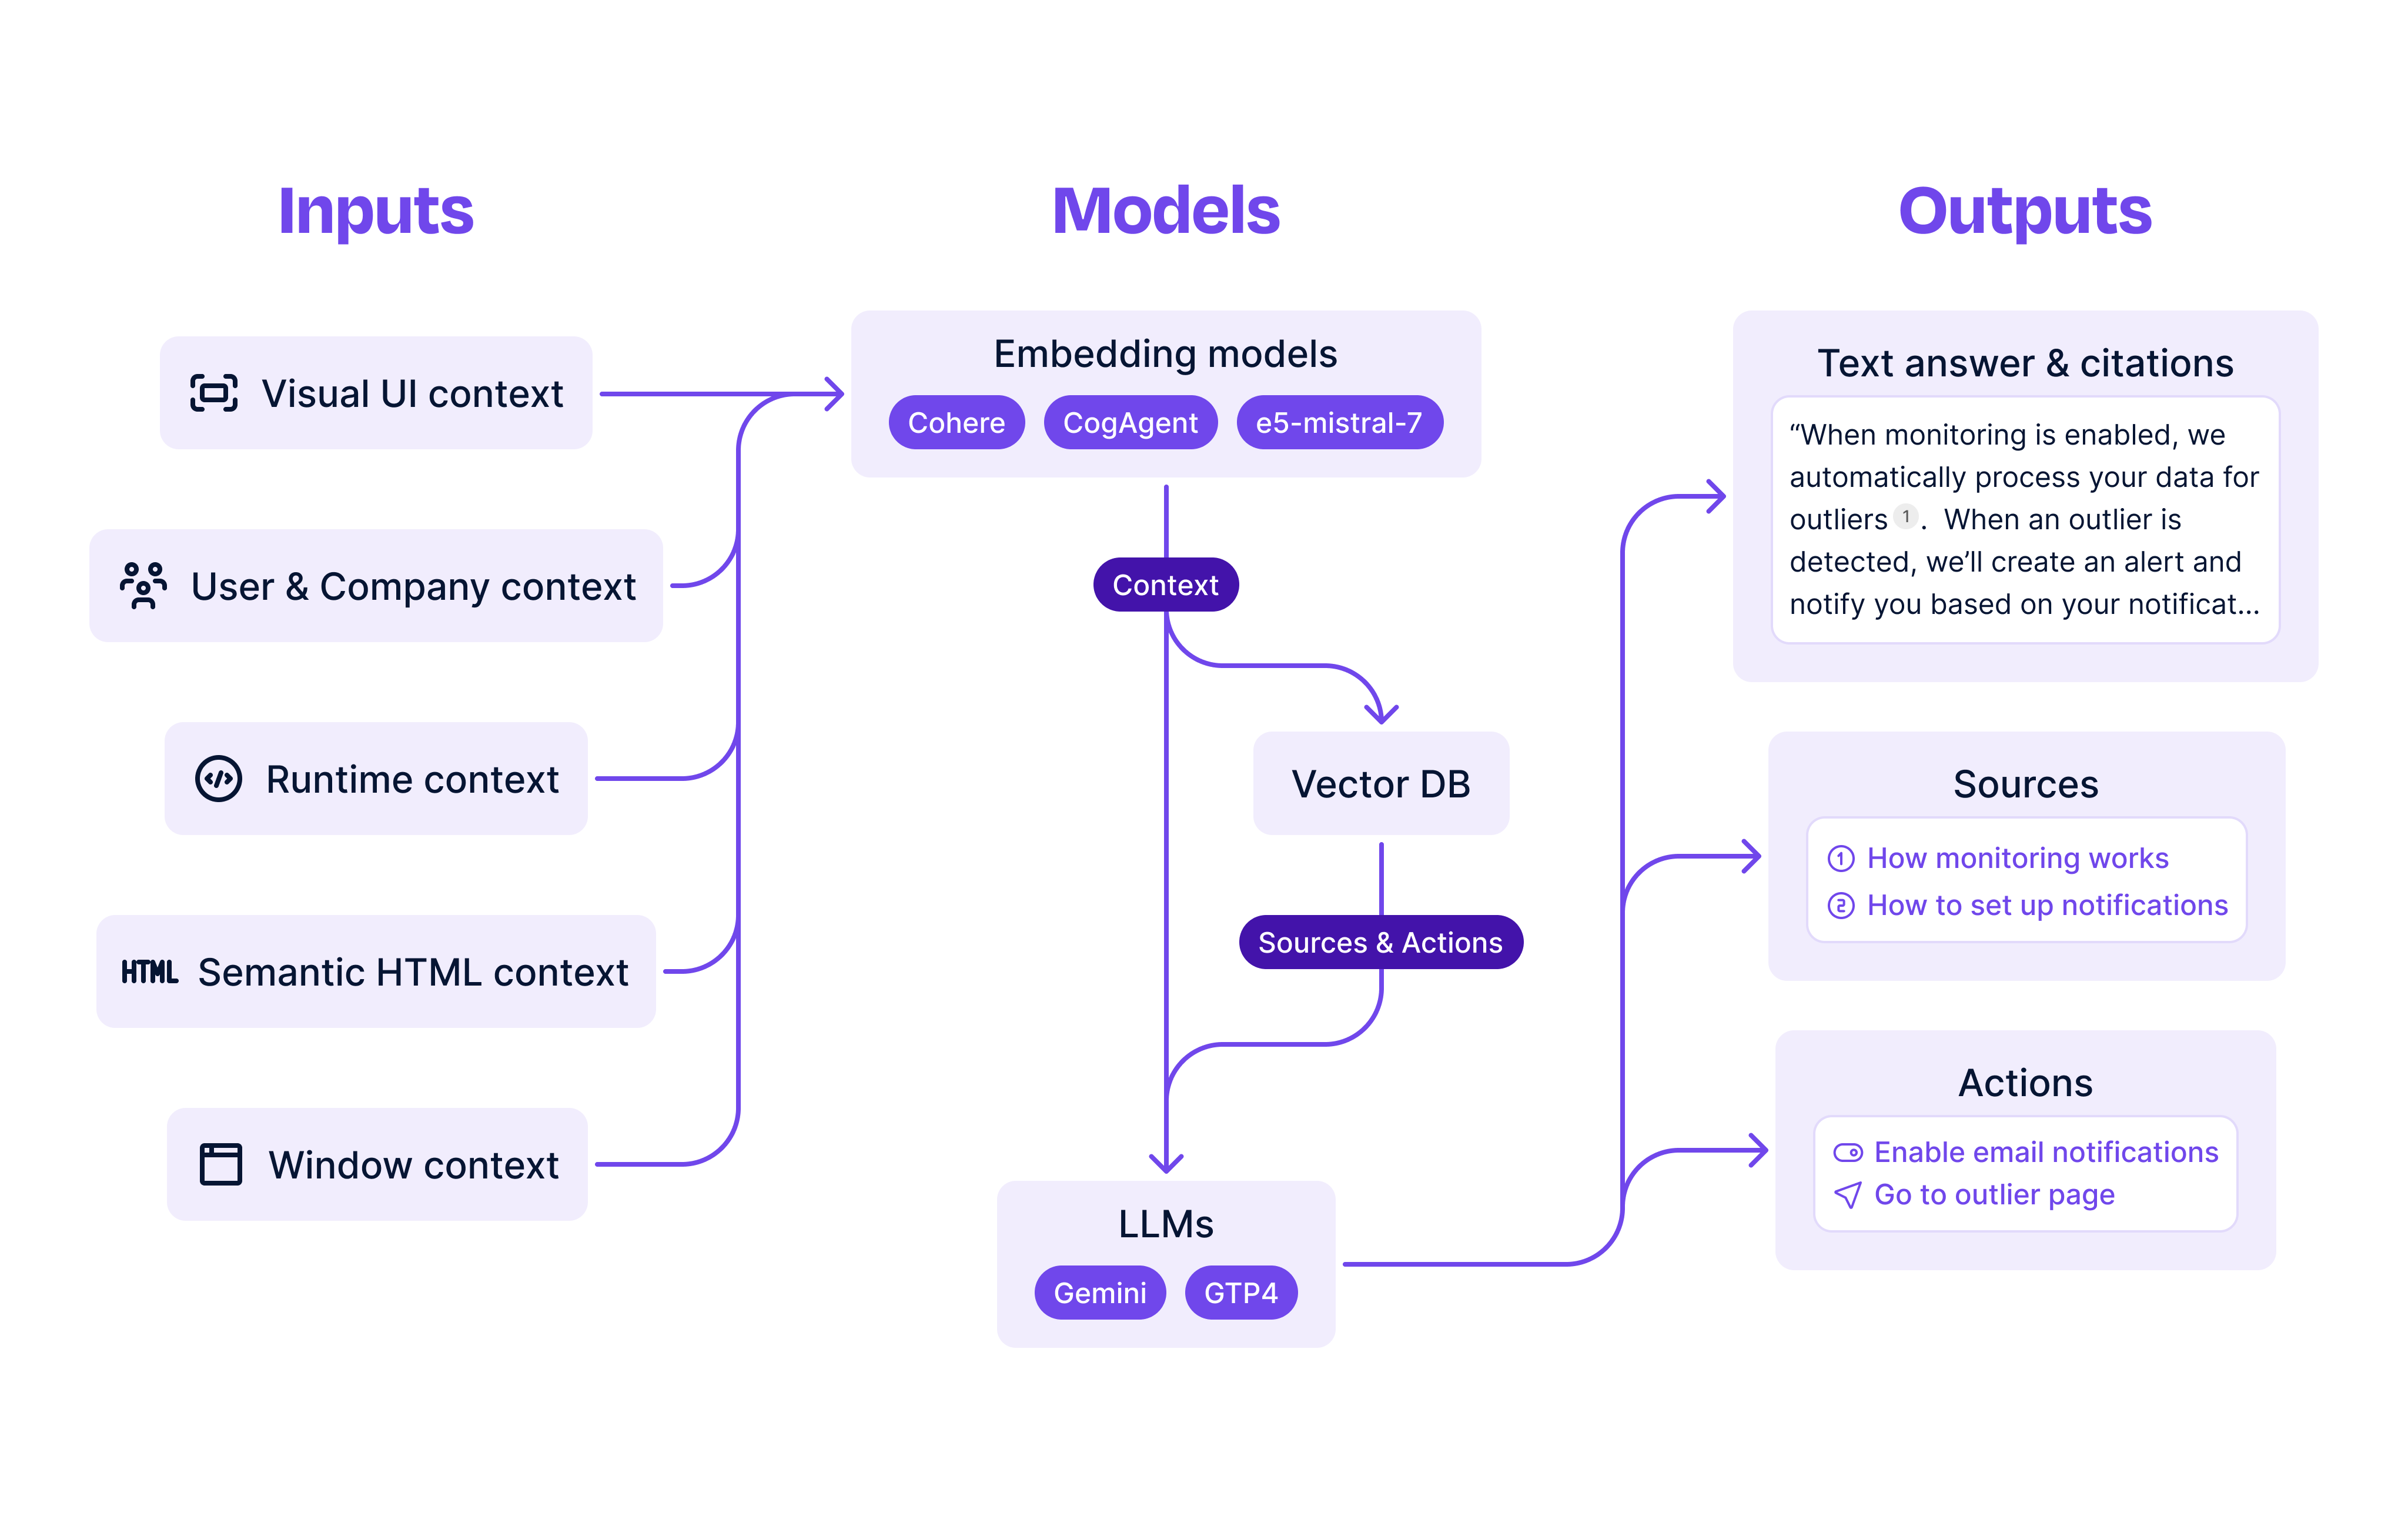 Inputs, ML models, and Outputs diagram